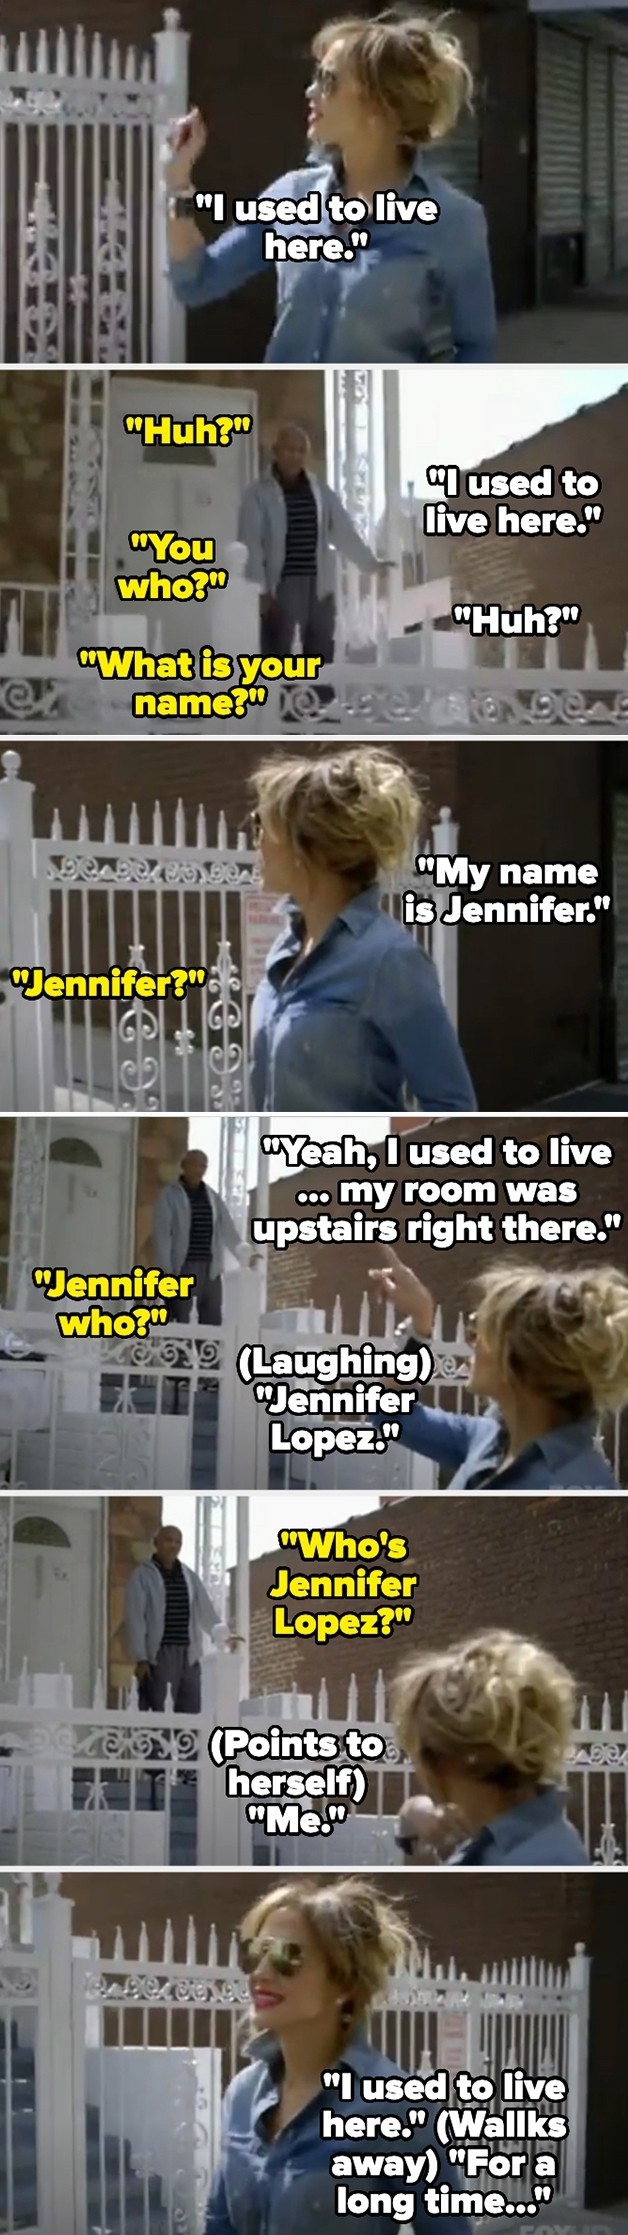 Woman conversing about past residence, mentioning the name &quot;Jennifer&quot; several times in a stairwell